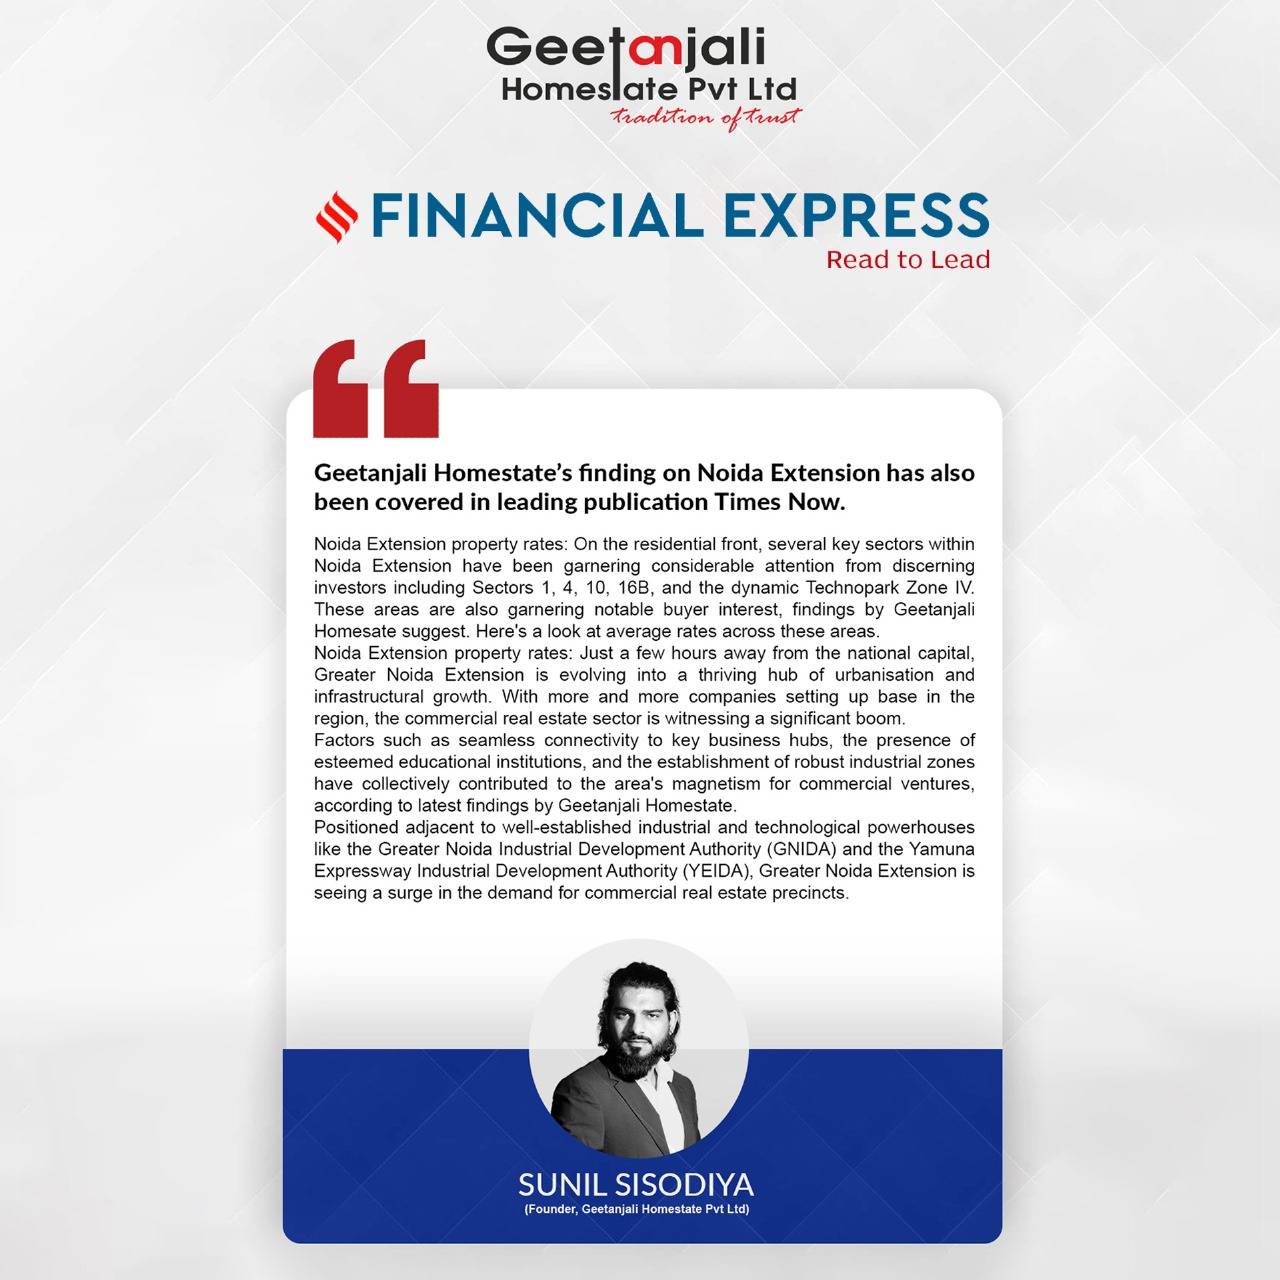 Geetanjali Homestate's Finding On Noida Extension Has Also Been Covered In Leading Publication Financial Express